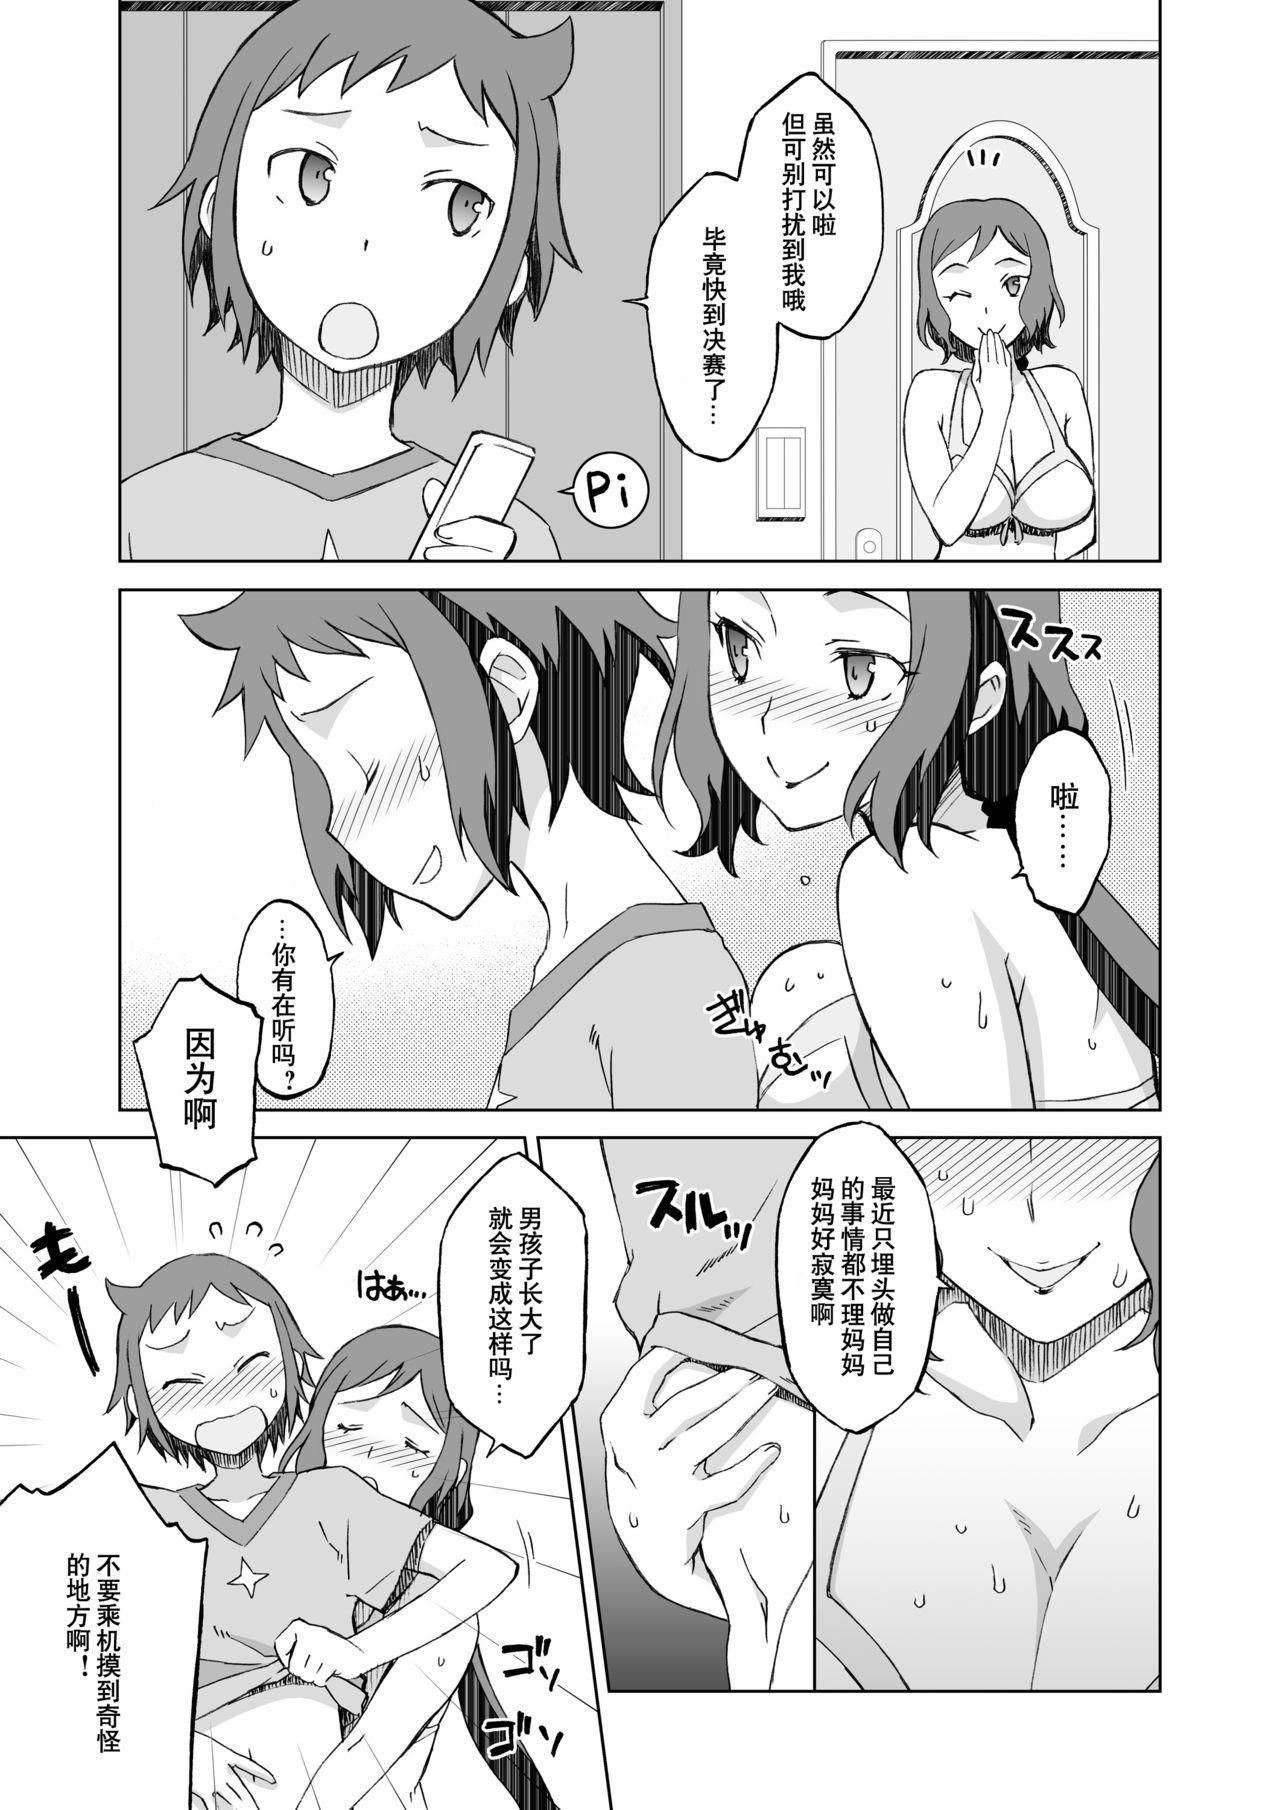 Hard Fucking Build Fuckers 2 - Gundam build fighters Step - Page 5